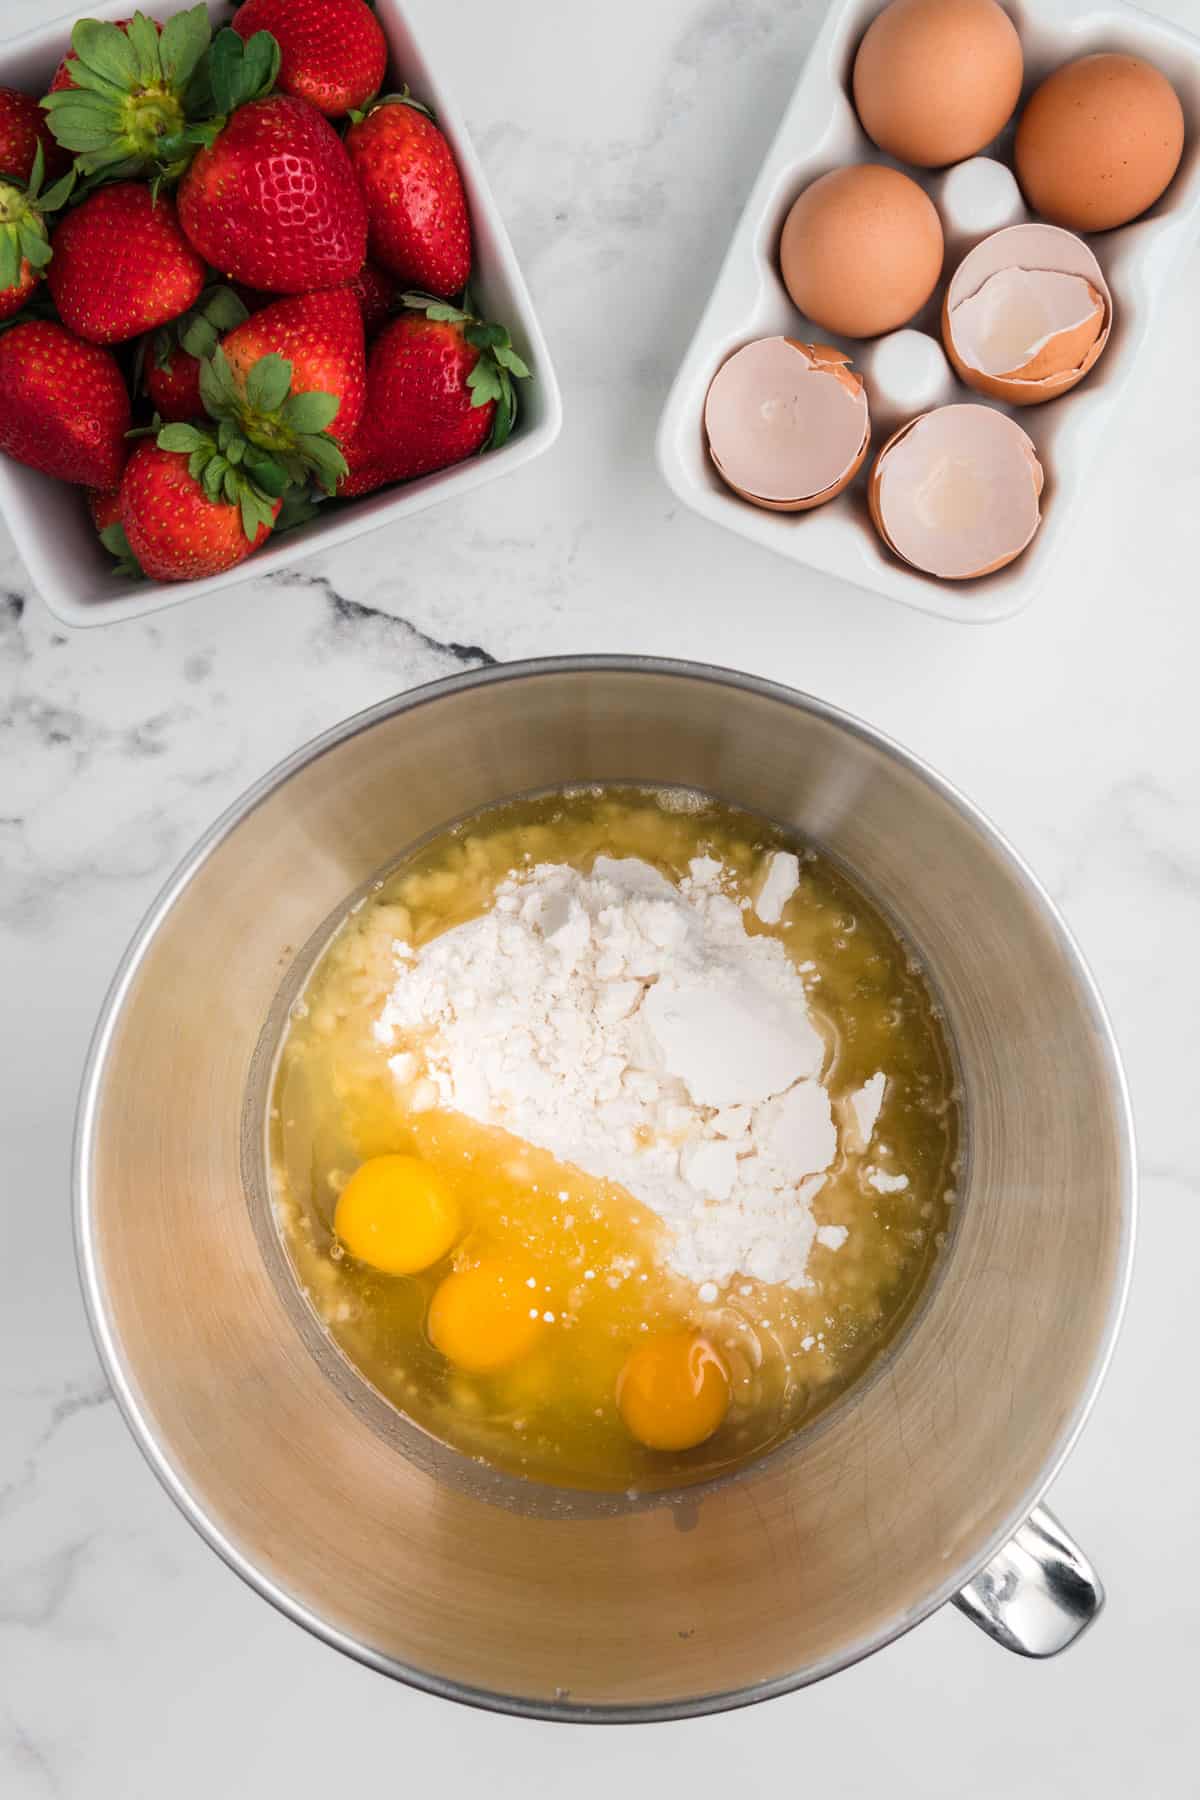 Cake mix, eggs, and oil in a stainless steel mixing bowl.